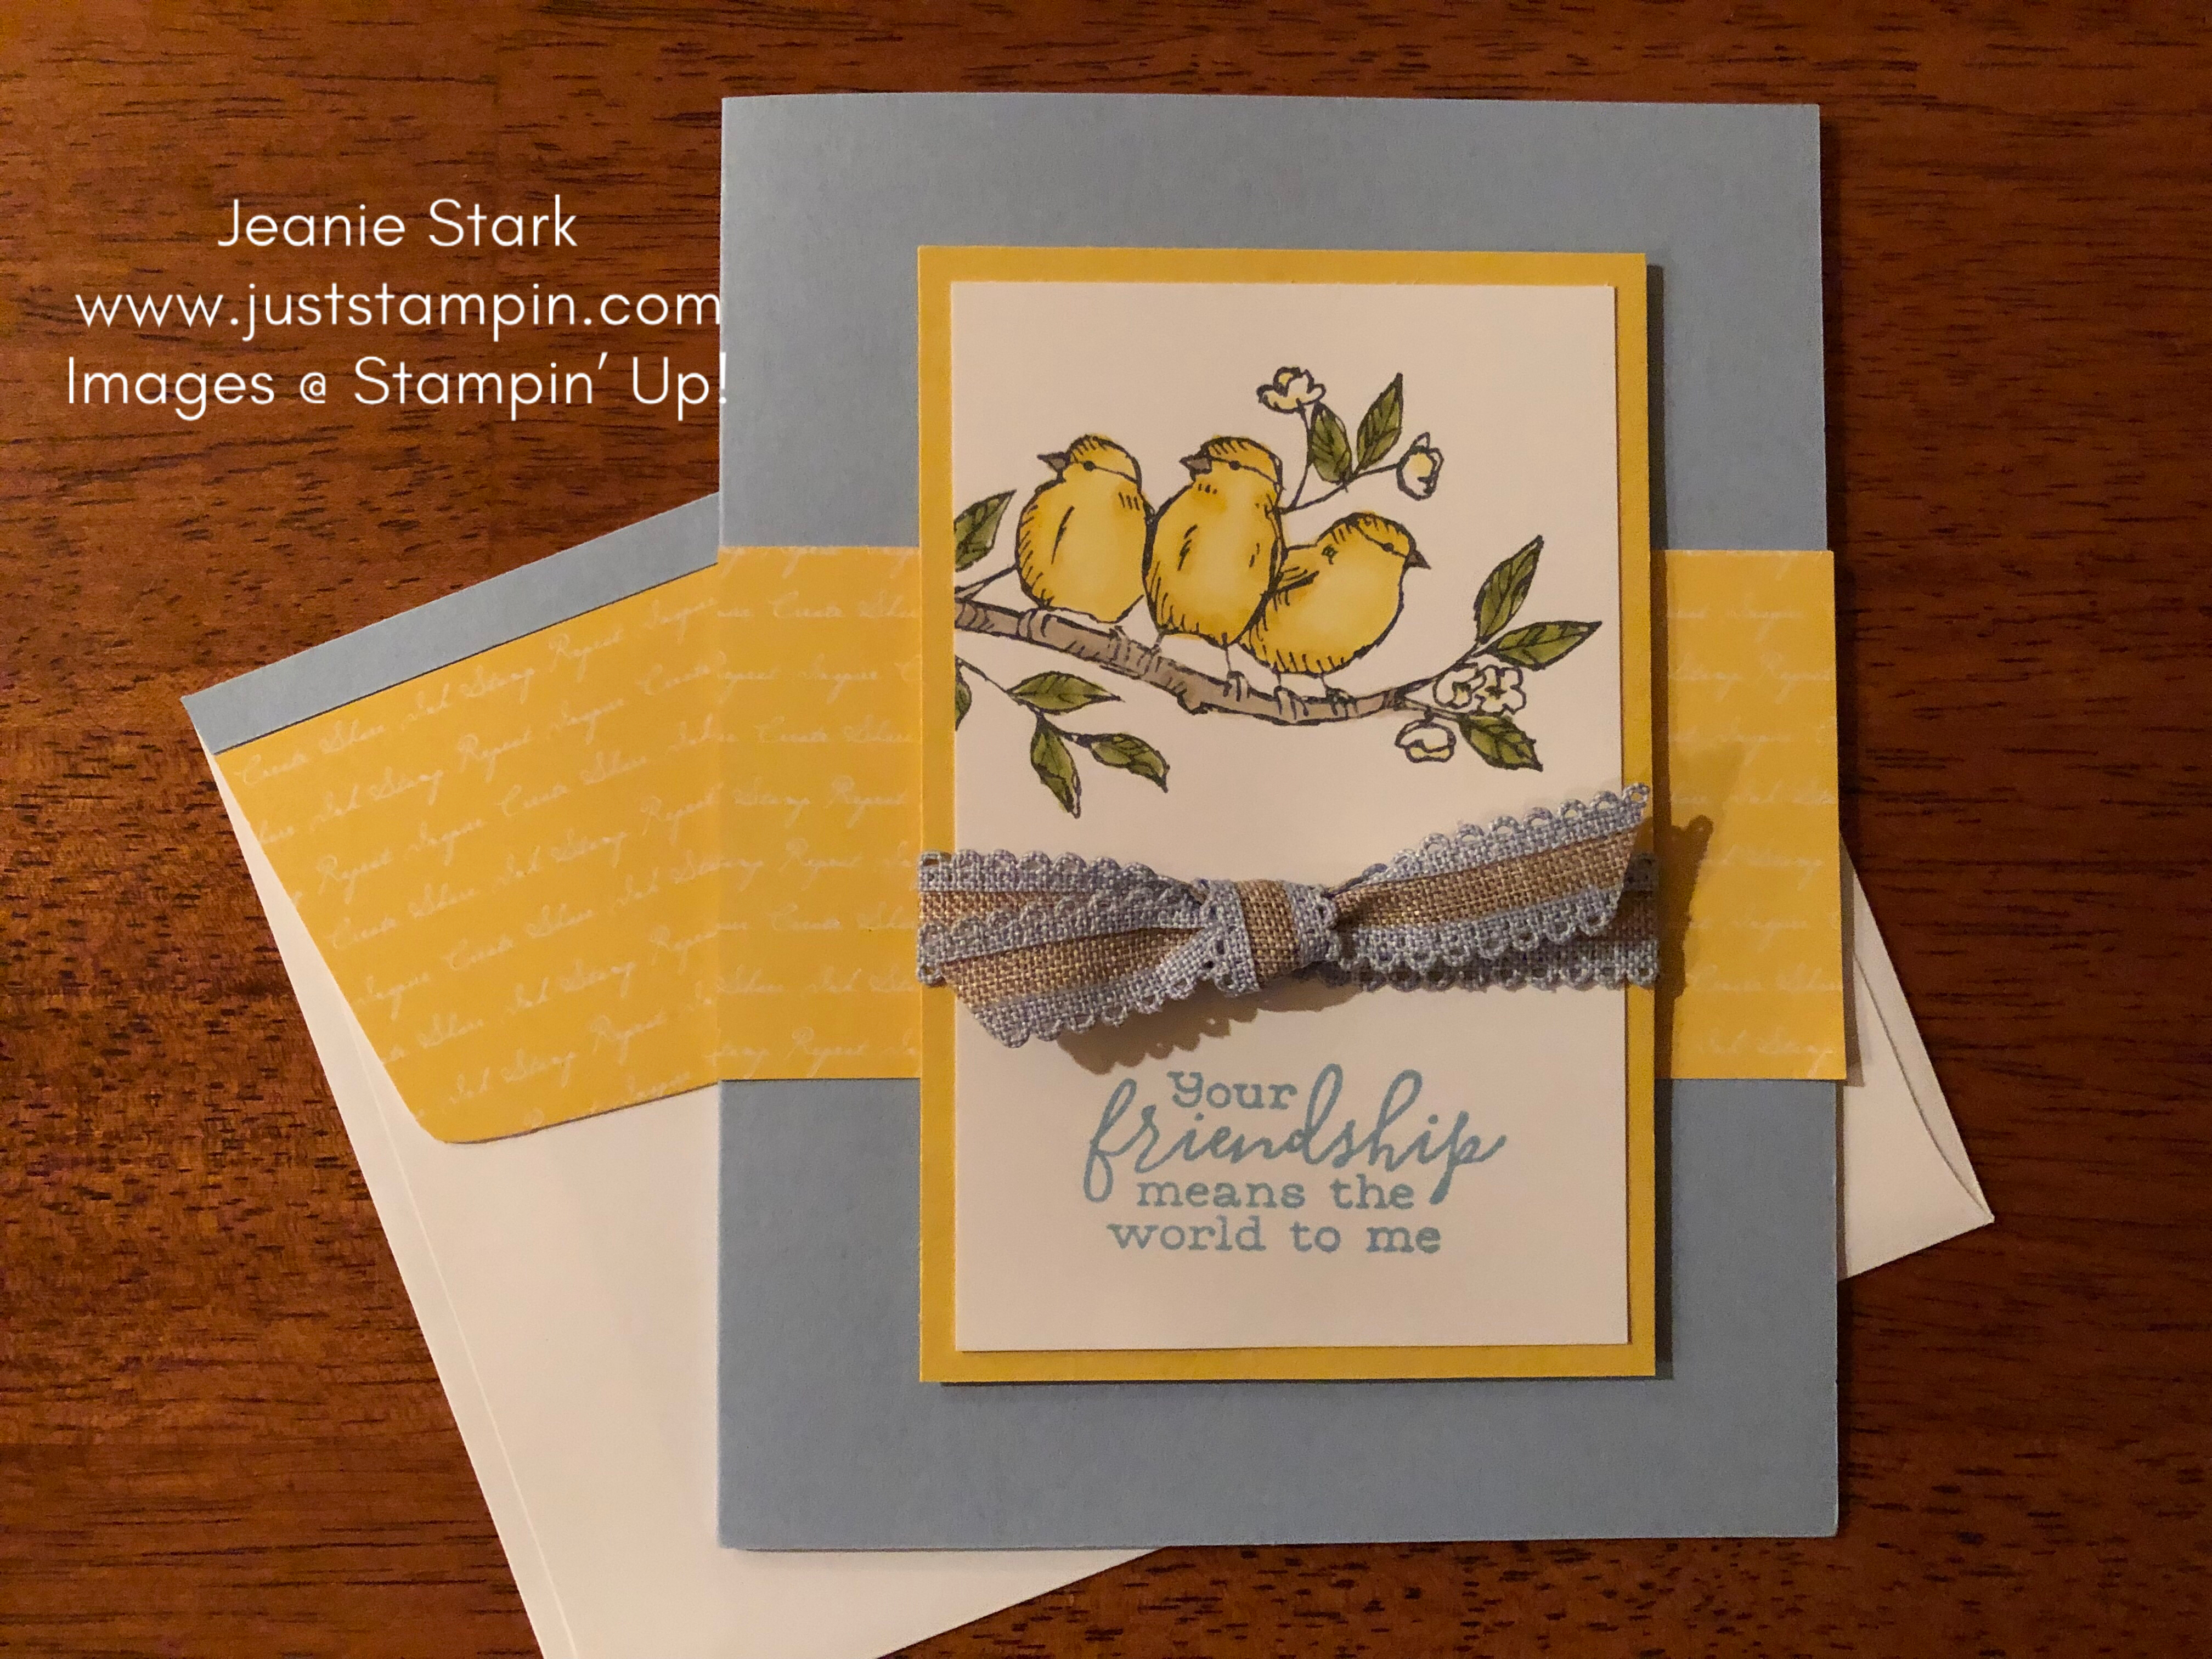 Stampin' Up! Free As A Bird friend card idea - Jeanie Stark StampinUp